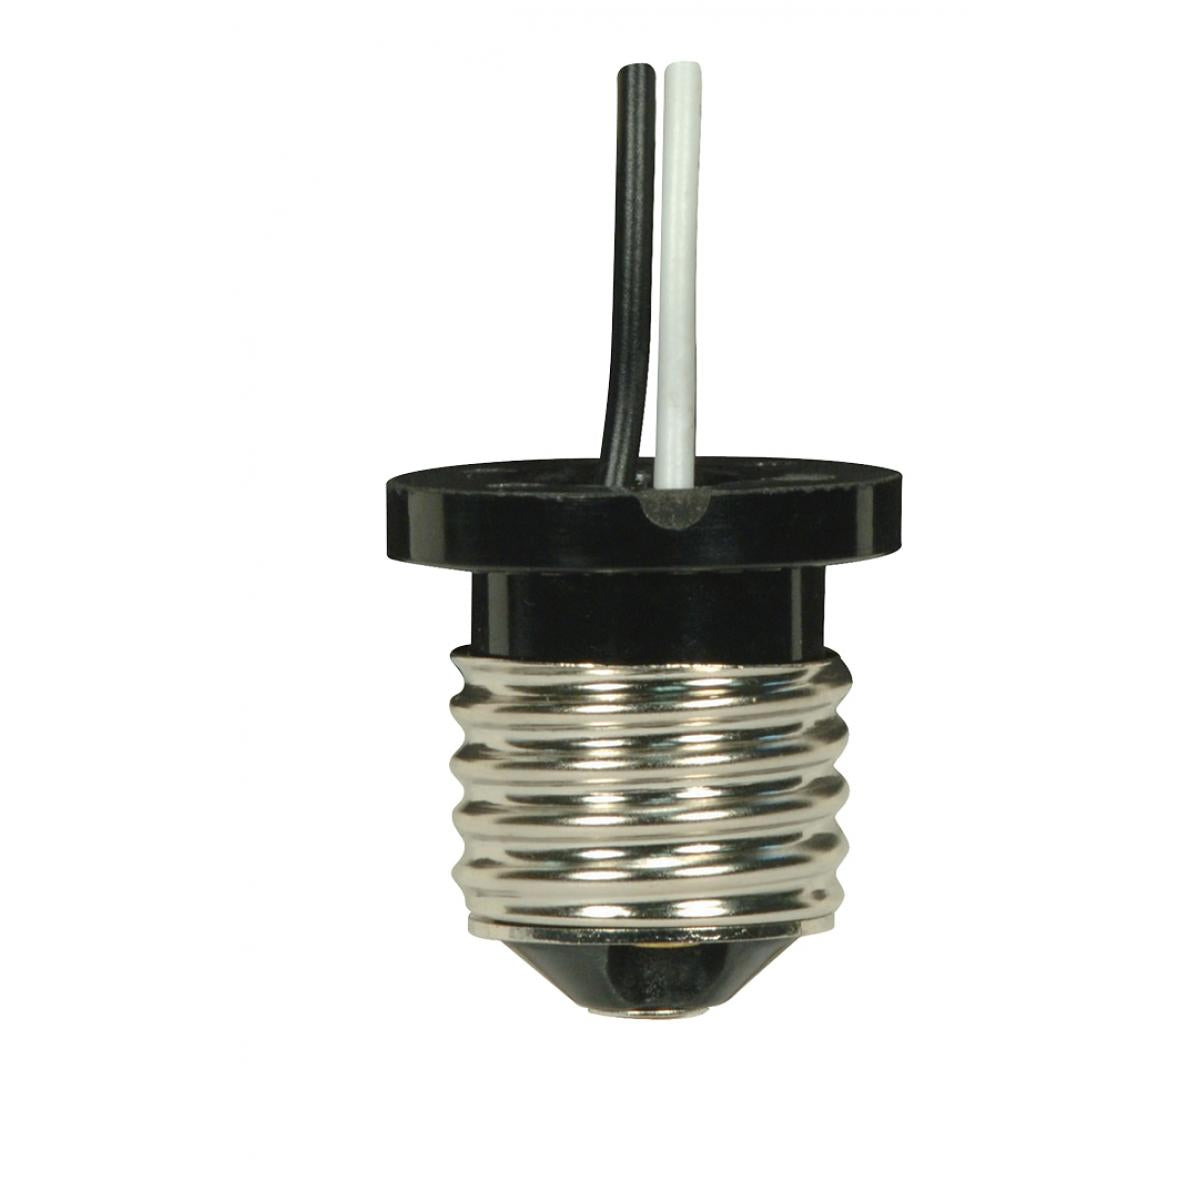 Satco 80-1970 Brown Medium Based Phenolic E26 Flanged Adapter 10" 18GA 105C Leads 1/2" Overall Extension 660W 600V